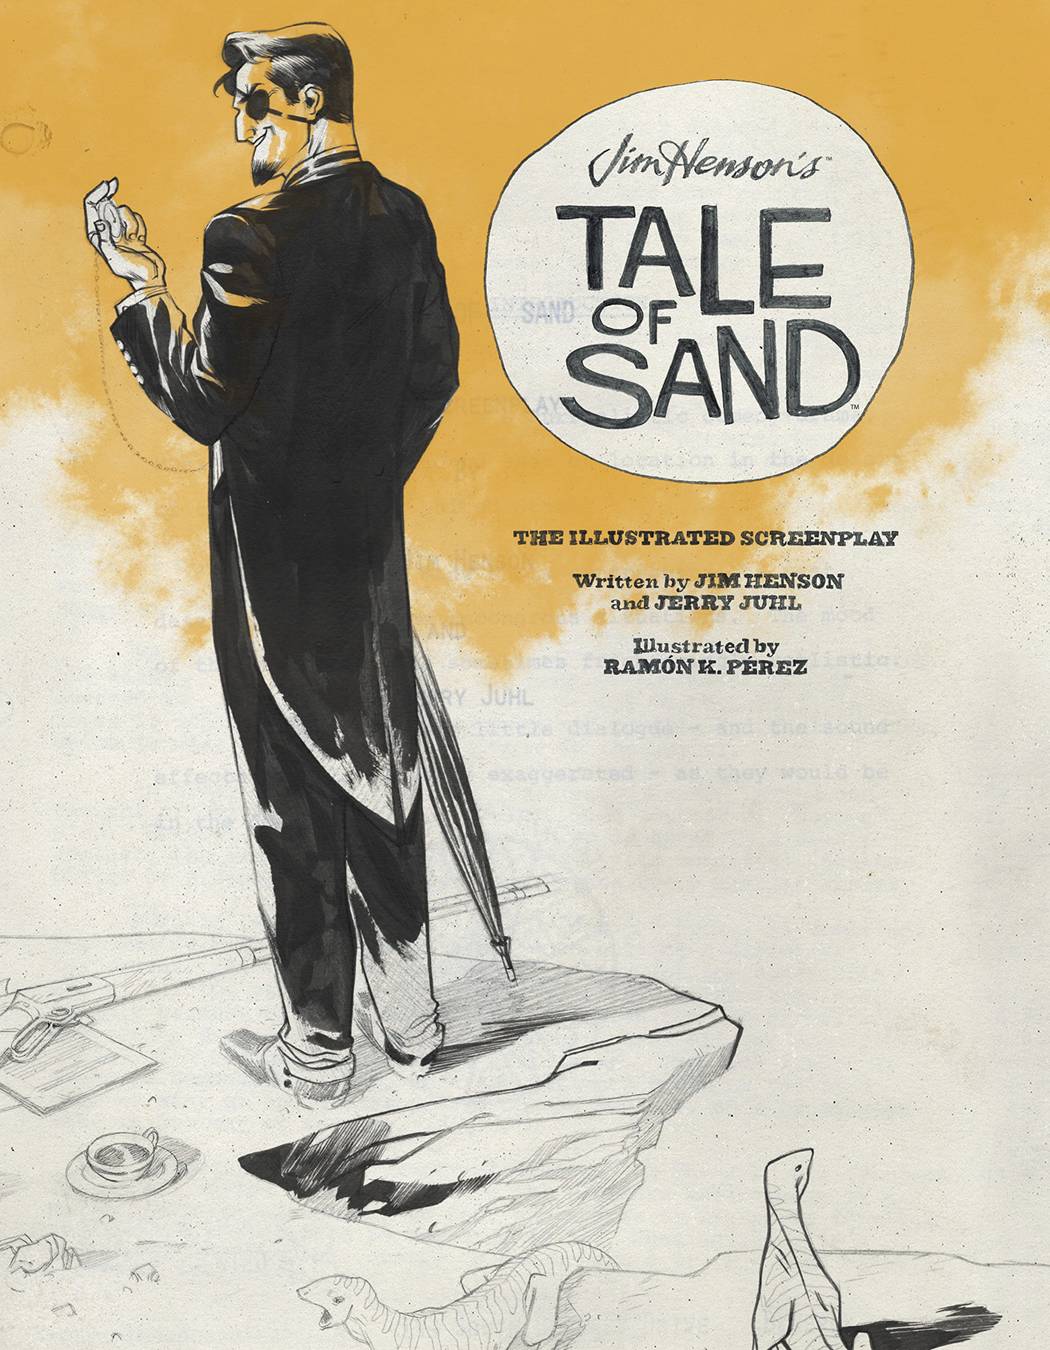 Jim Hensons Tale of Sand Illustrated Screenplay Hardcover